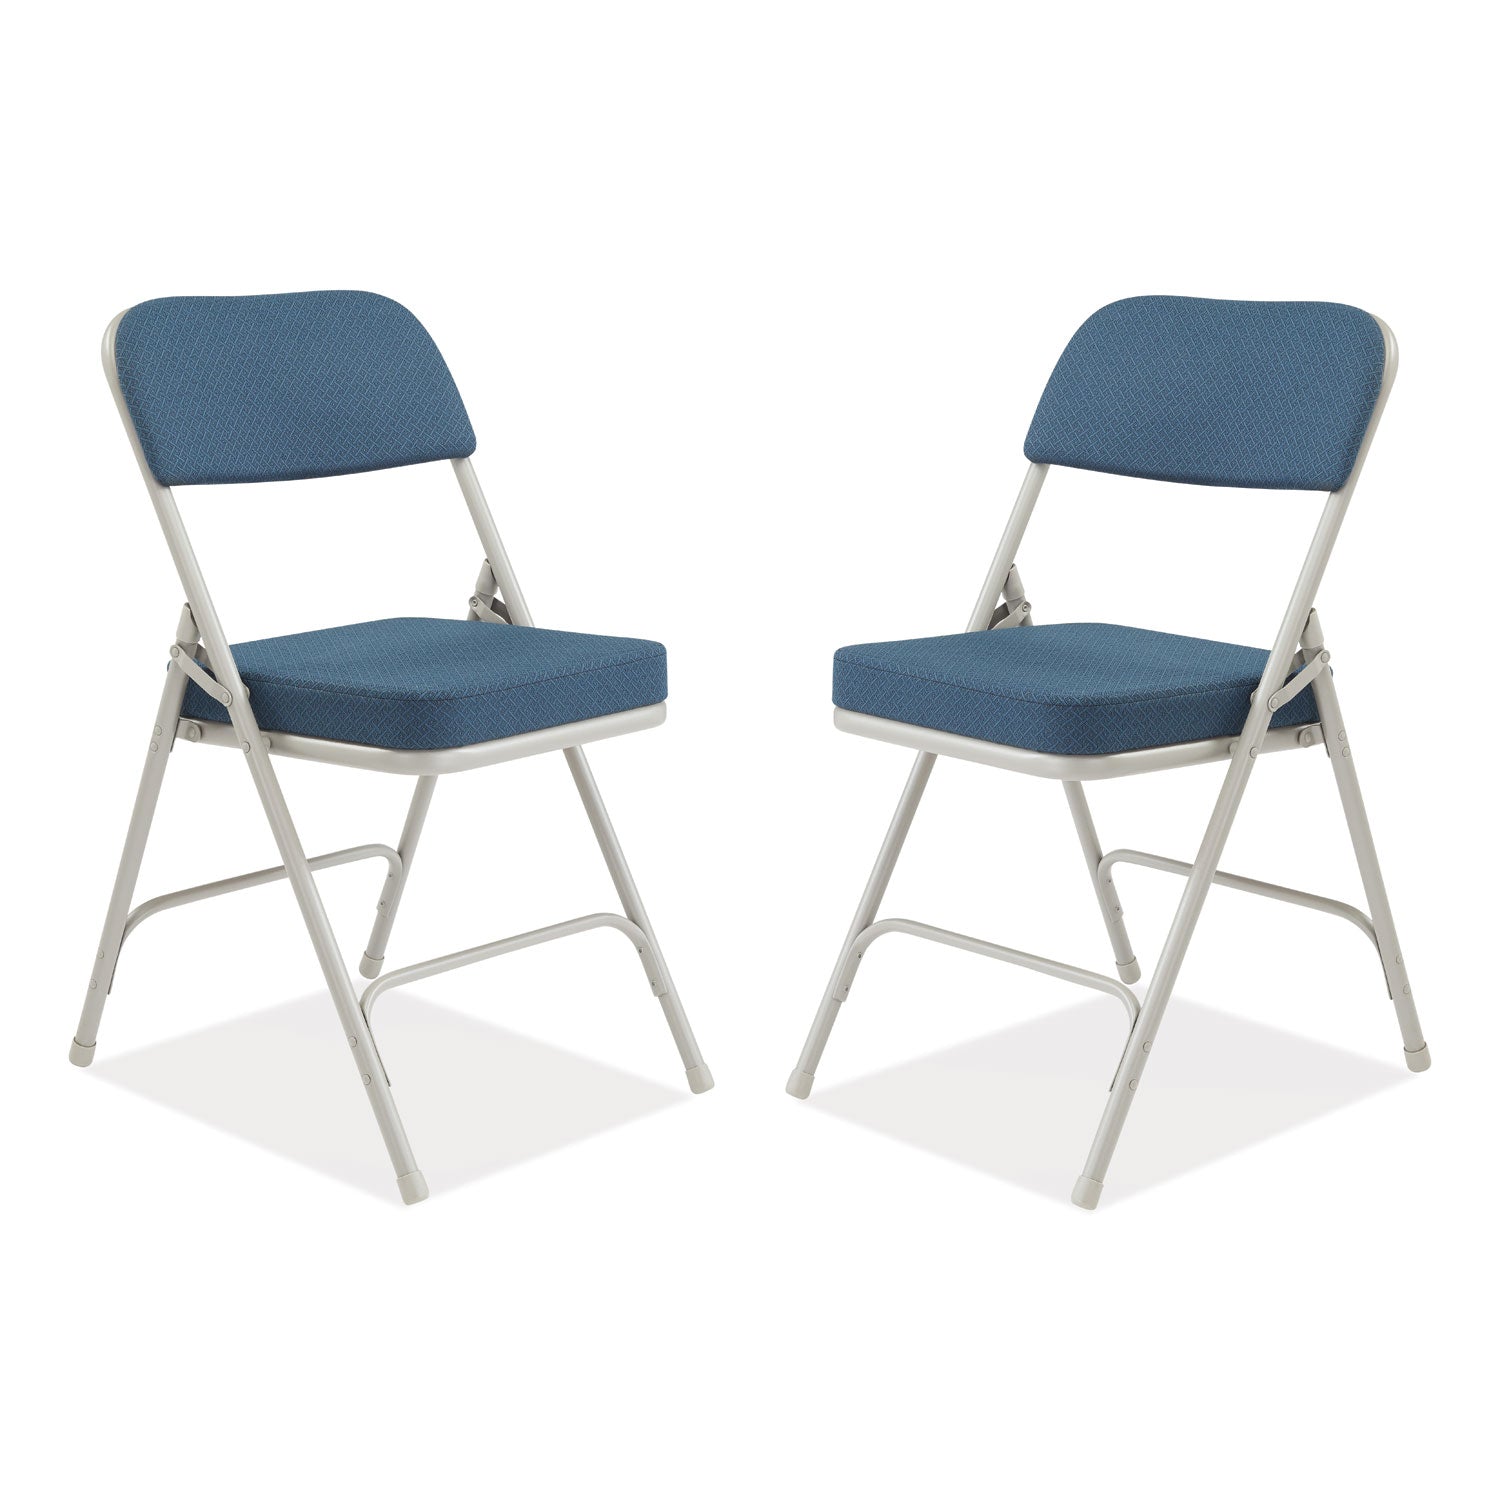 3200-series-fabric-dual-hinge-folding-chair-supports-300-lb-regal-blue-seat-back-gray-base-2-ct-ships-in-1-3-bus-days_nps3215 - 1